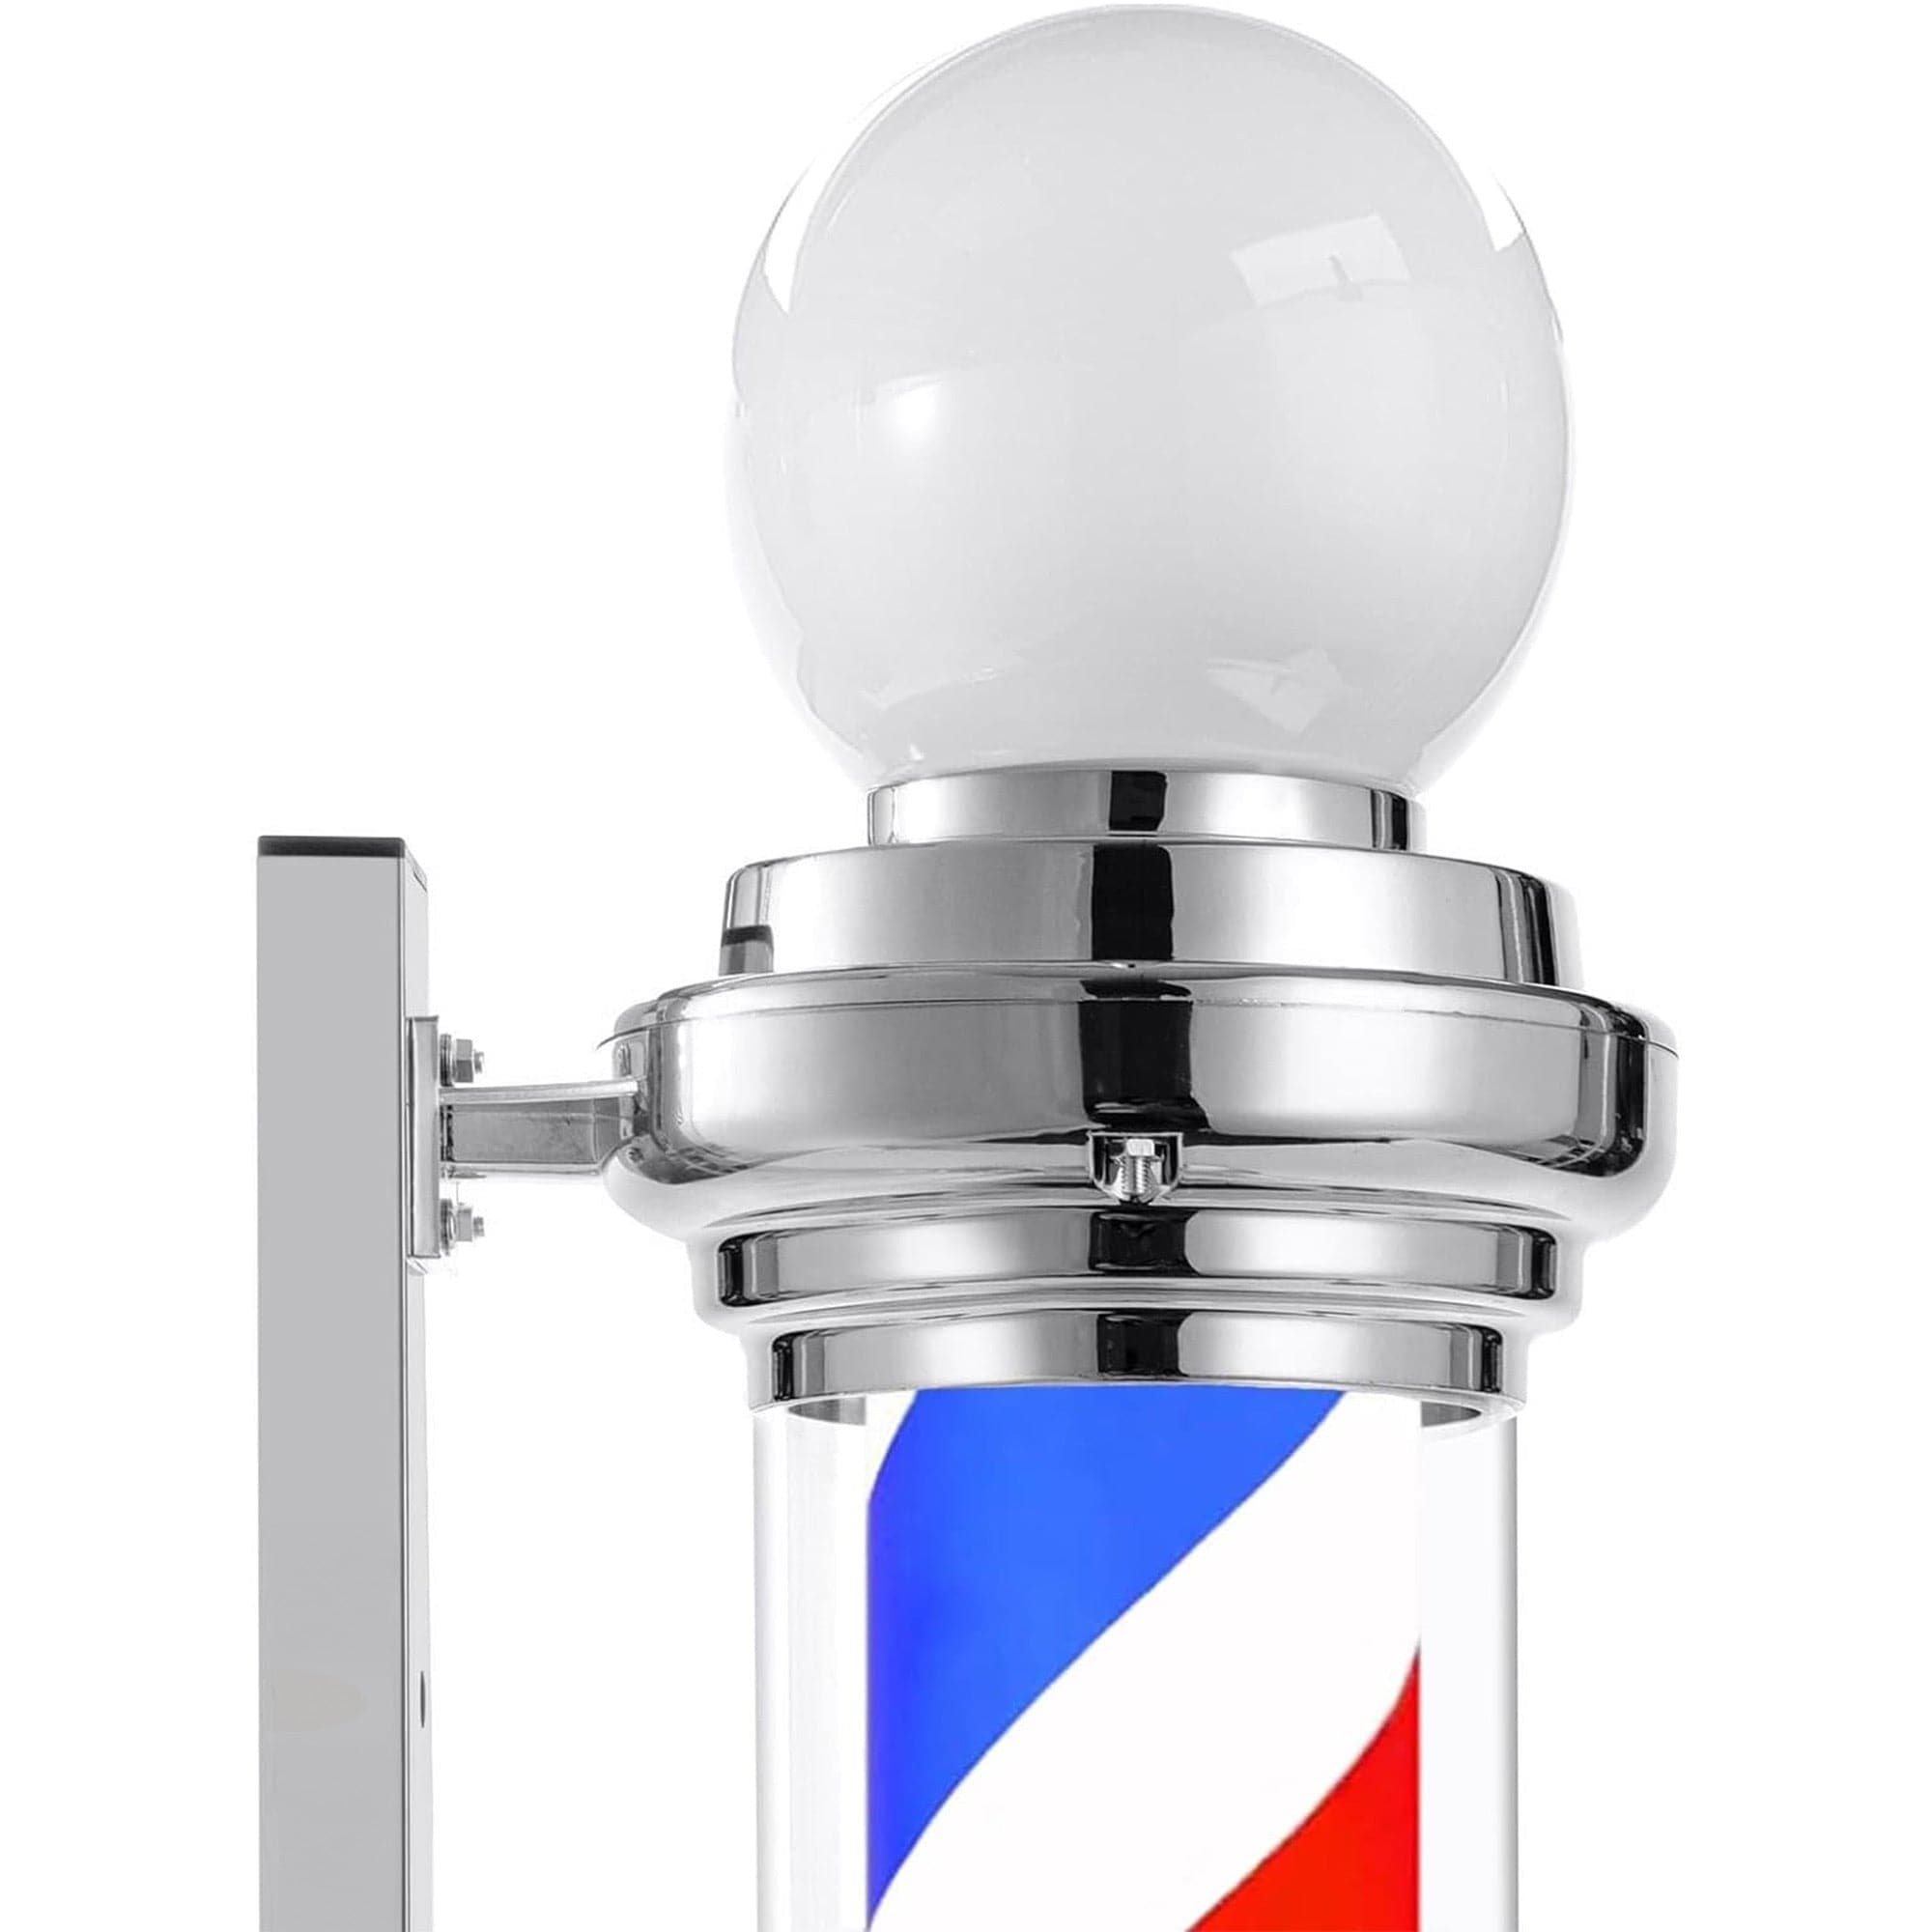 Gabri - Barber Pole Light With Open Sign (Silver Red White Blue Stripes) 85cm